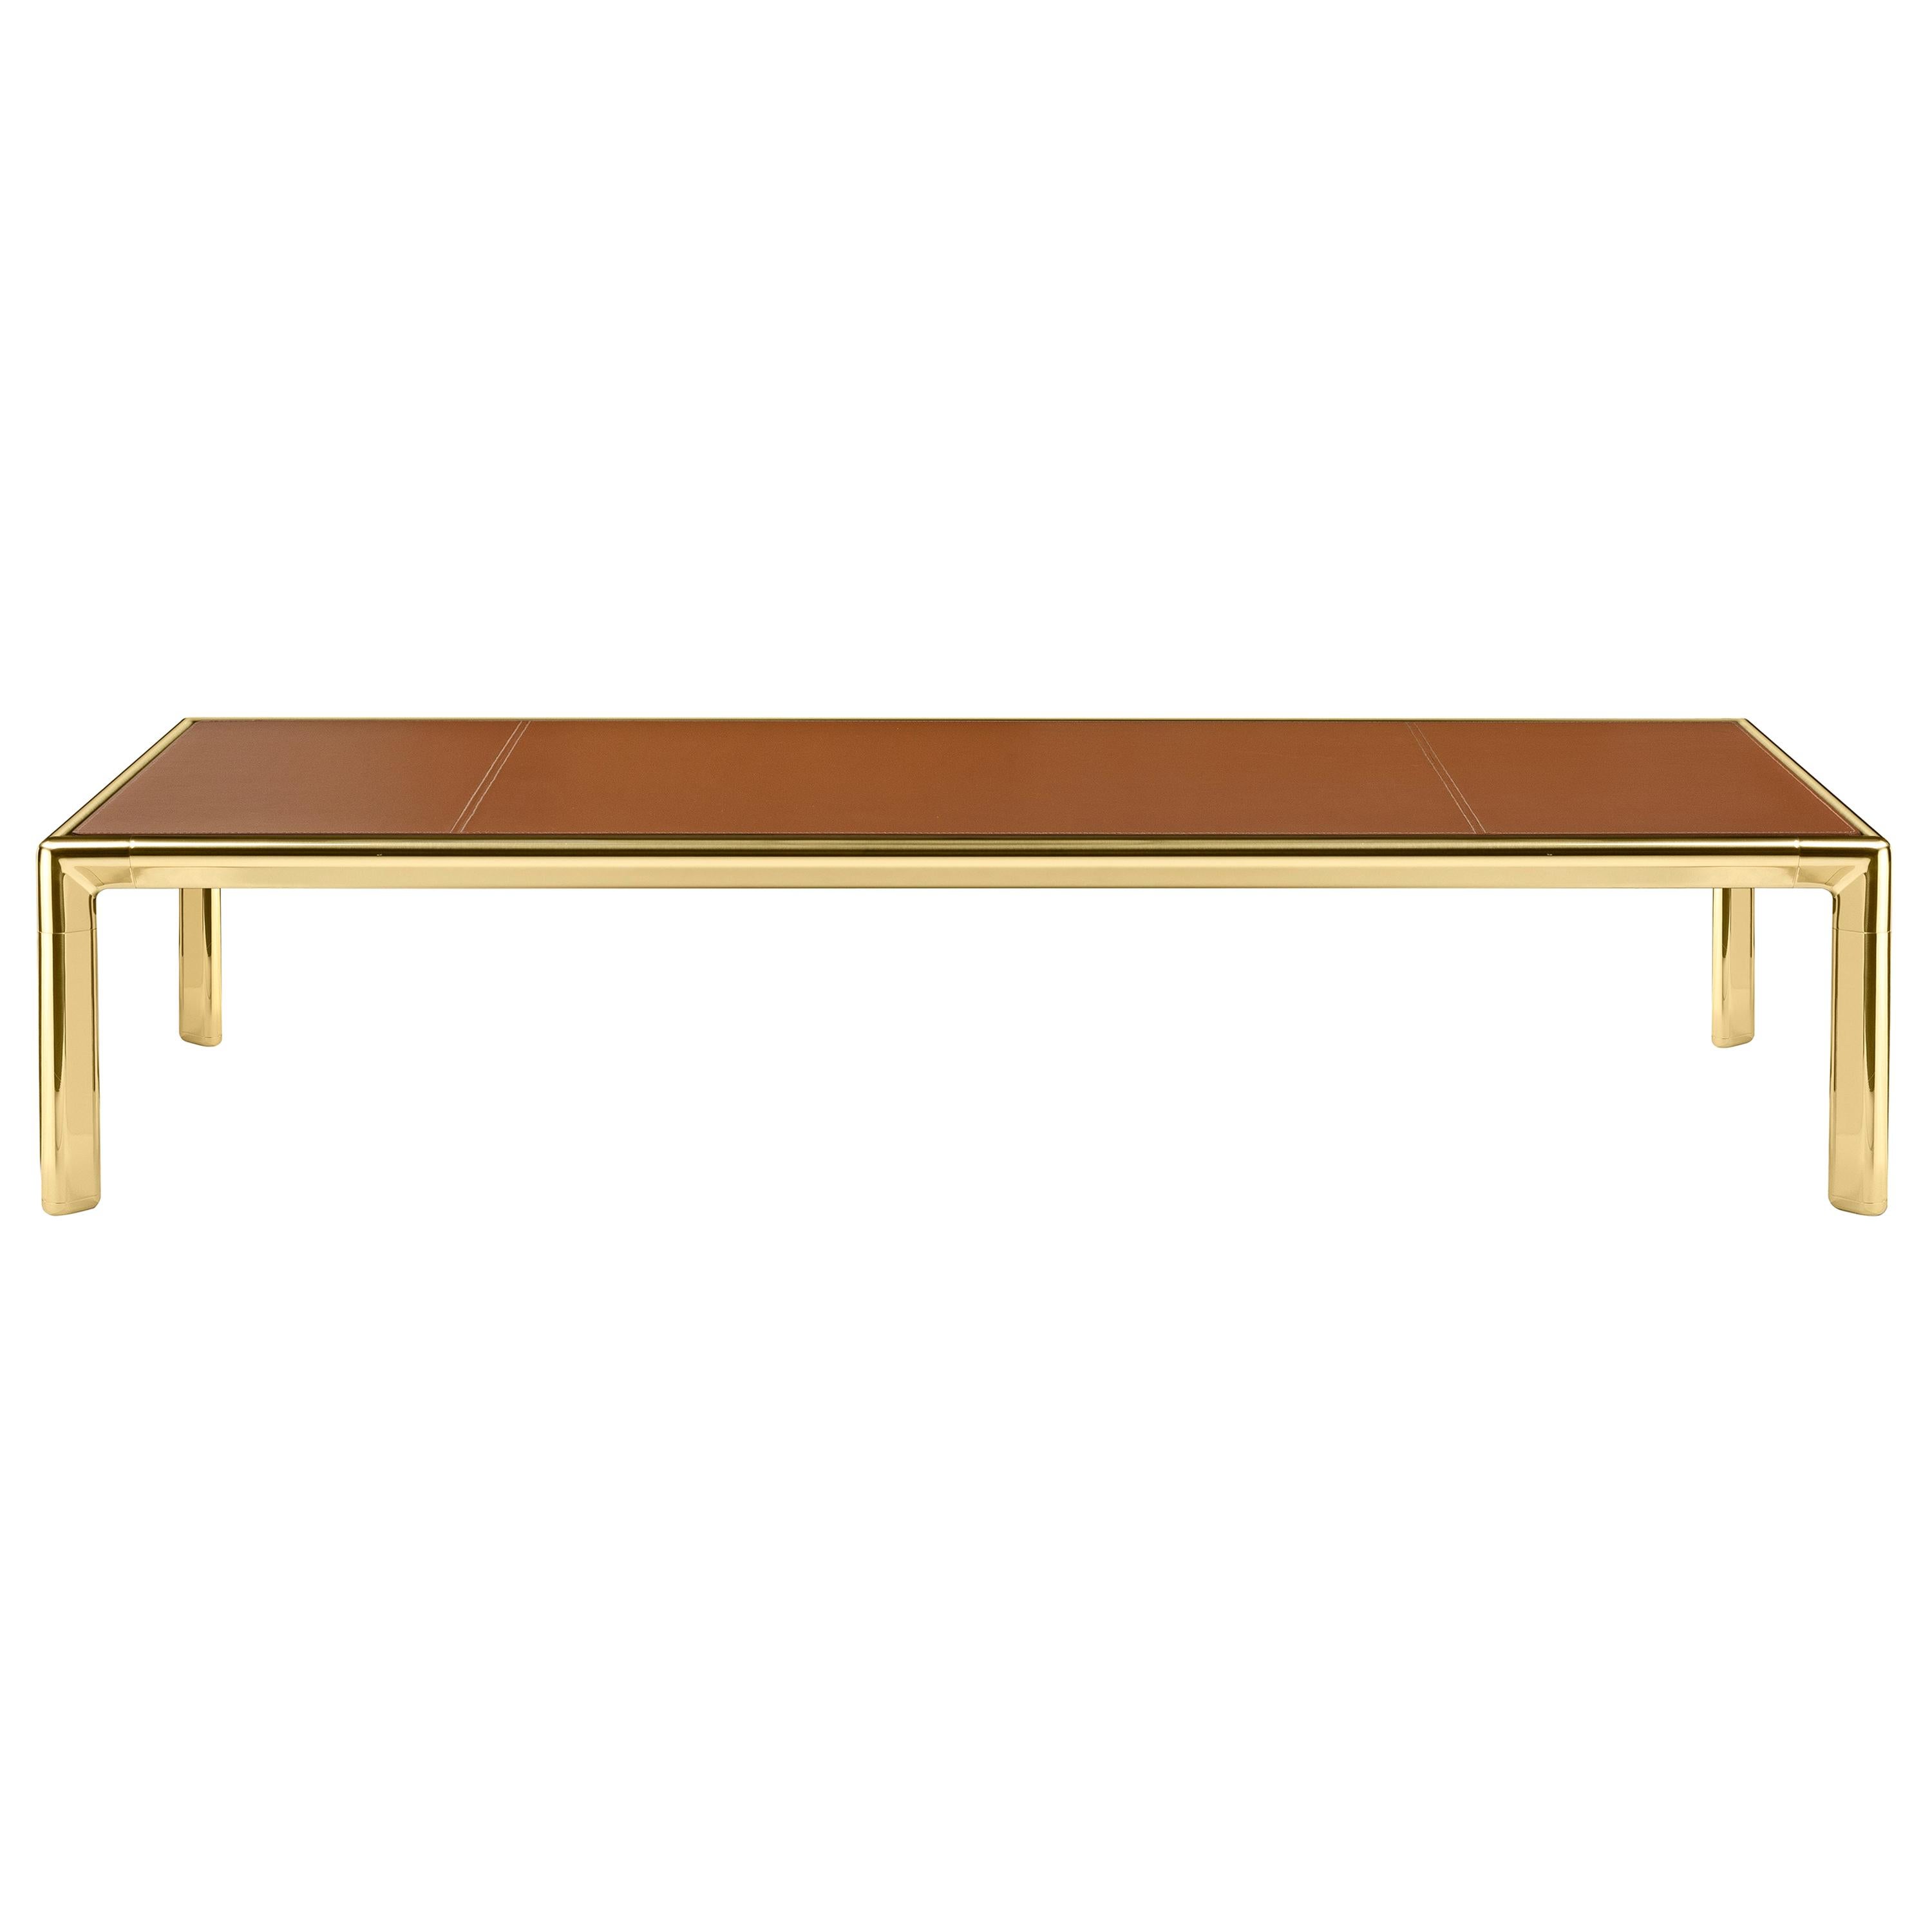 Frame Large Coffee Table in Cuoio Leather Top with Polished Brass